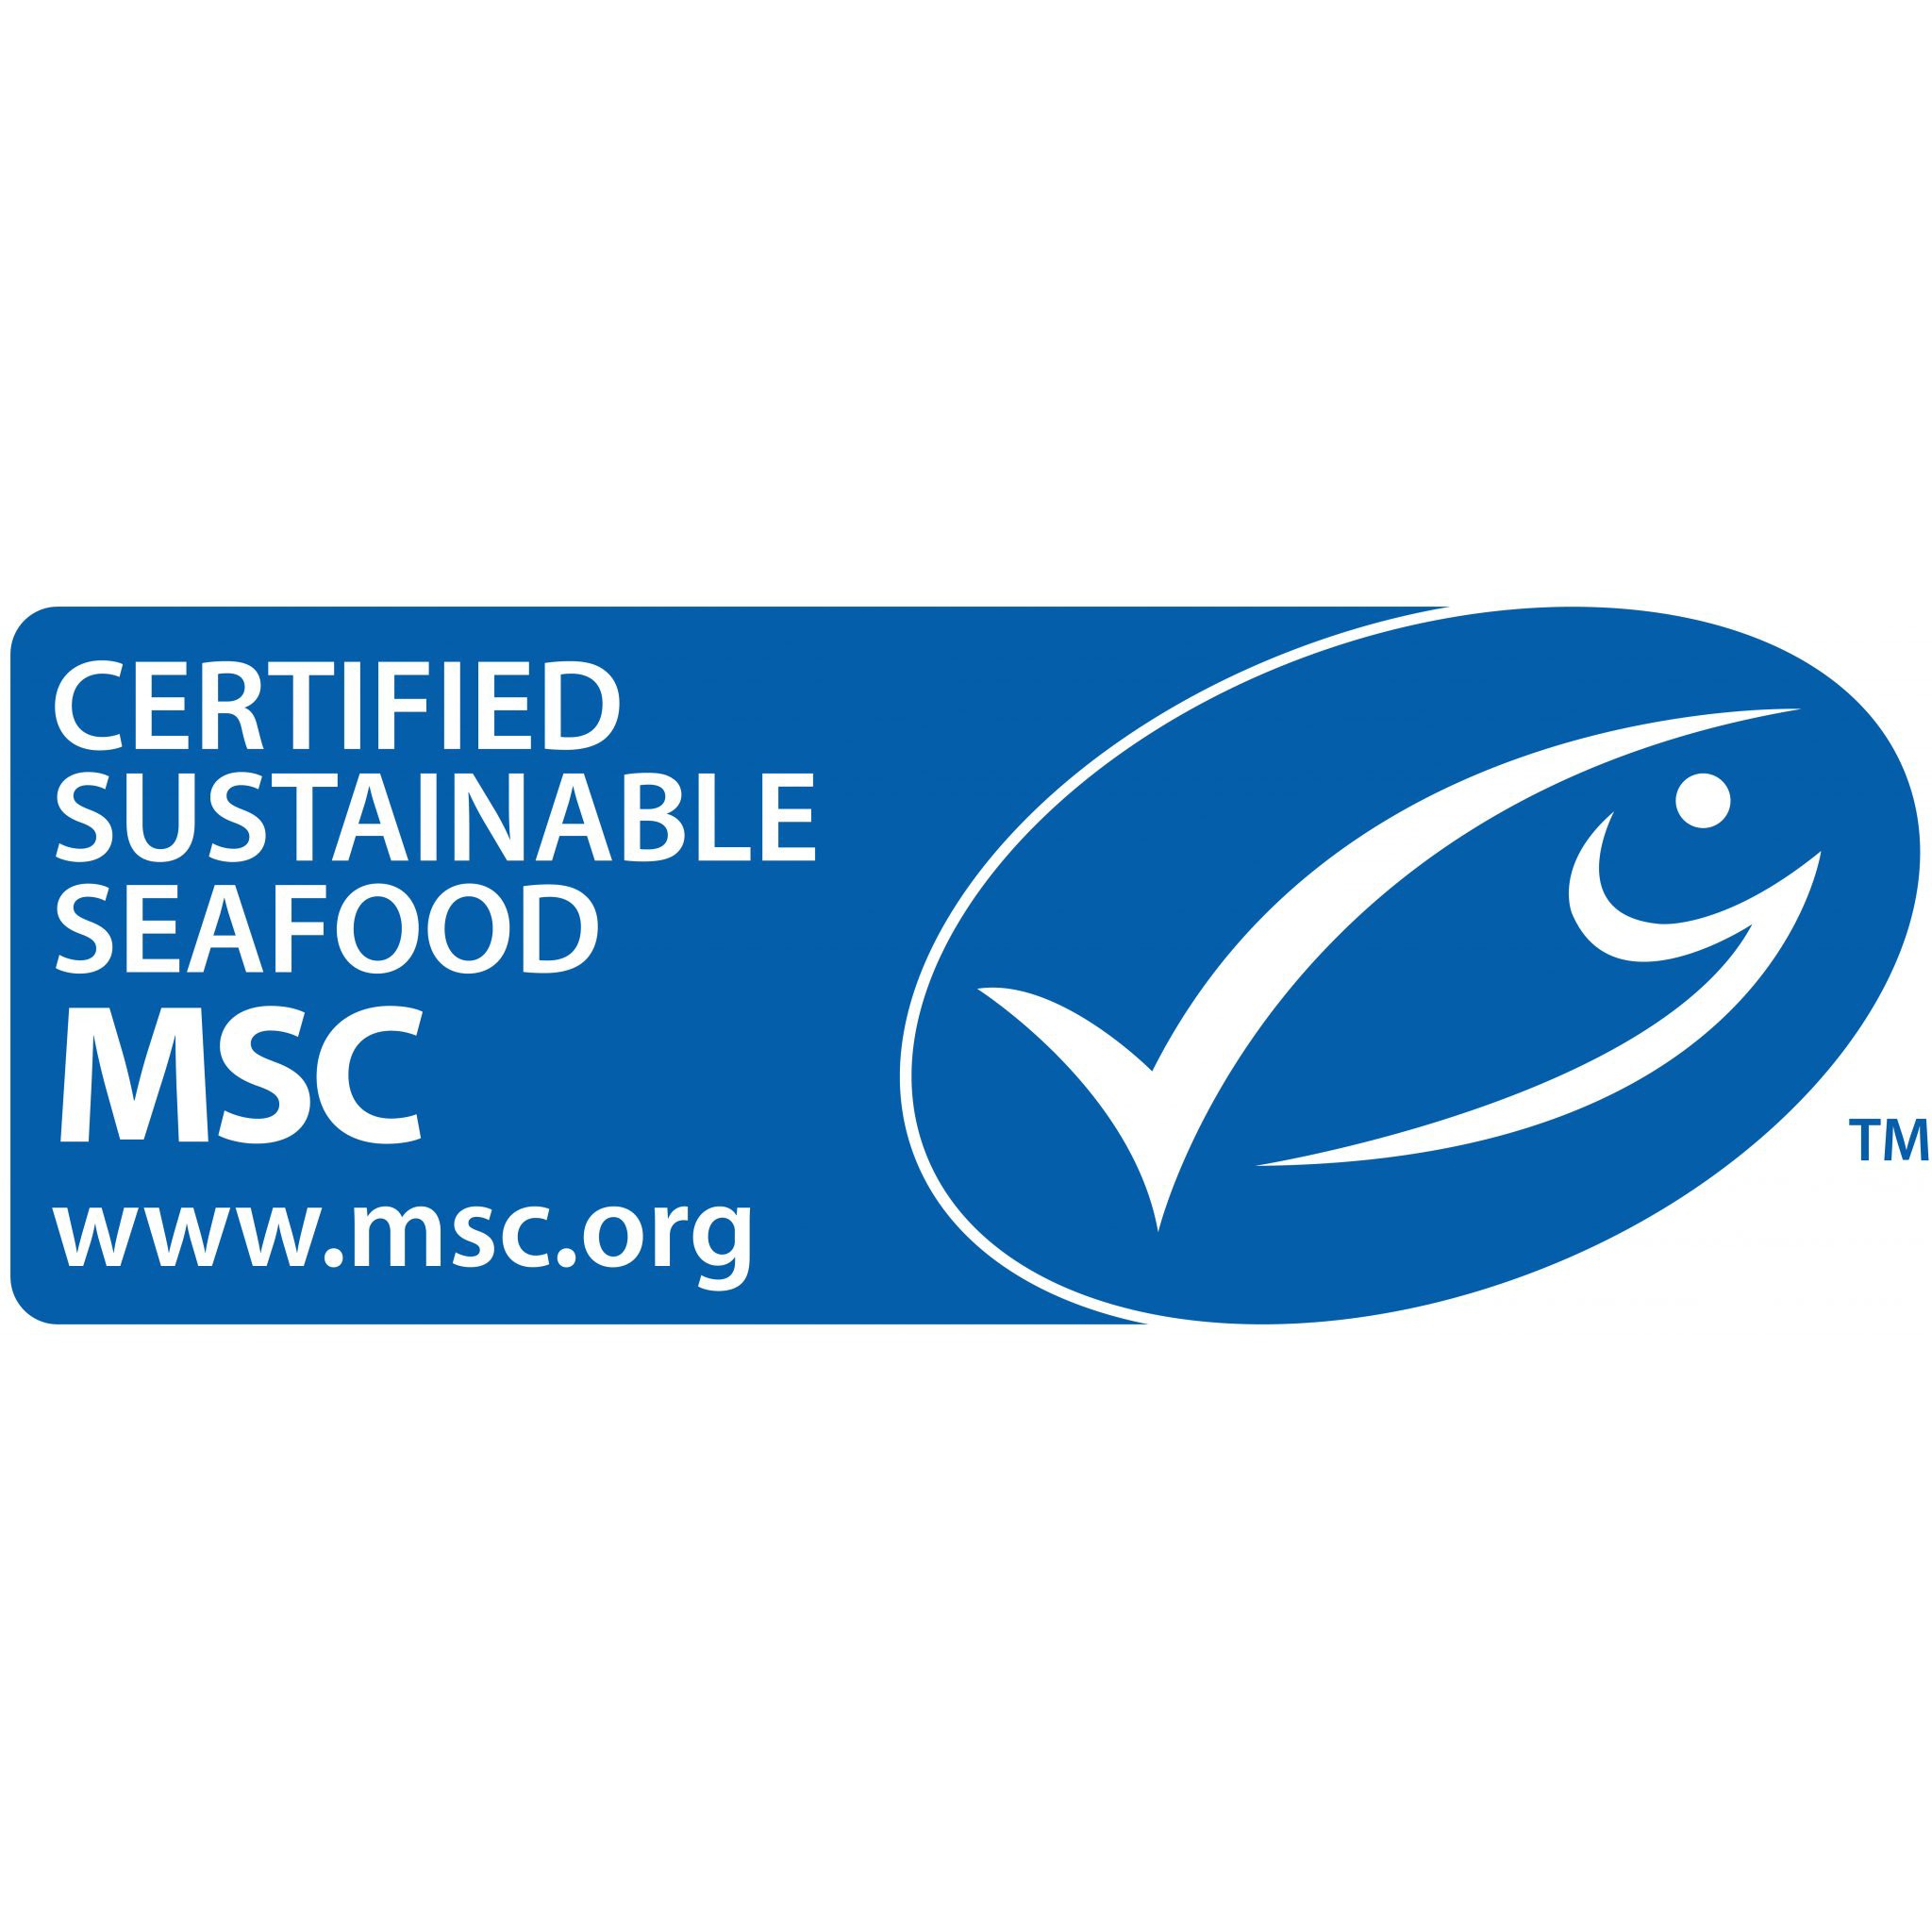 The world’s leading sustainable seafood certification standard just made some big changes for sharks